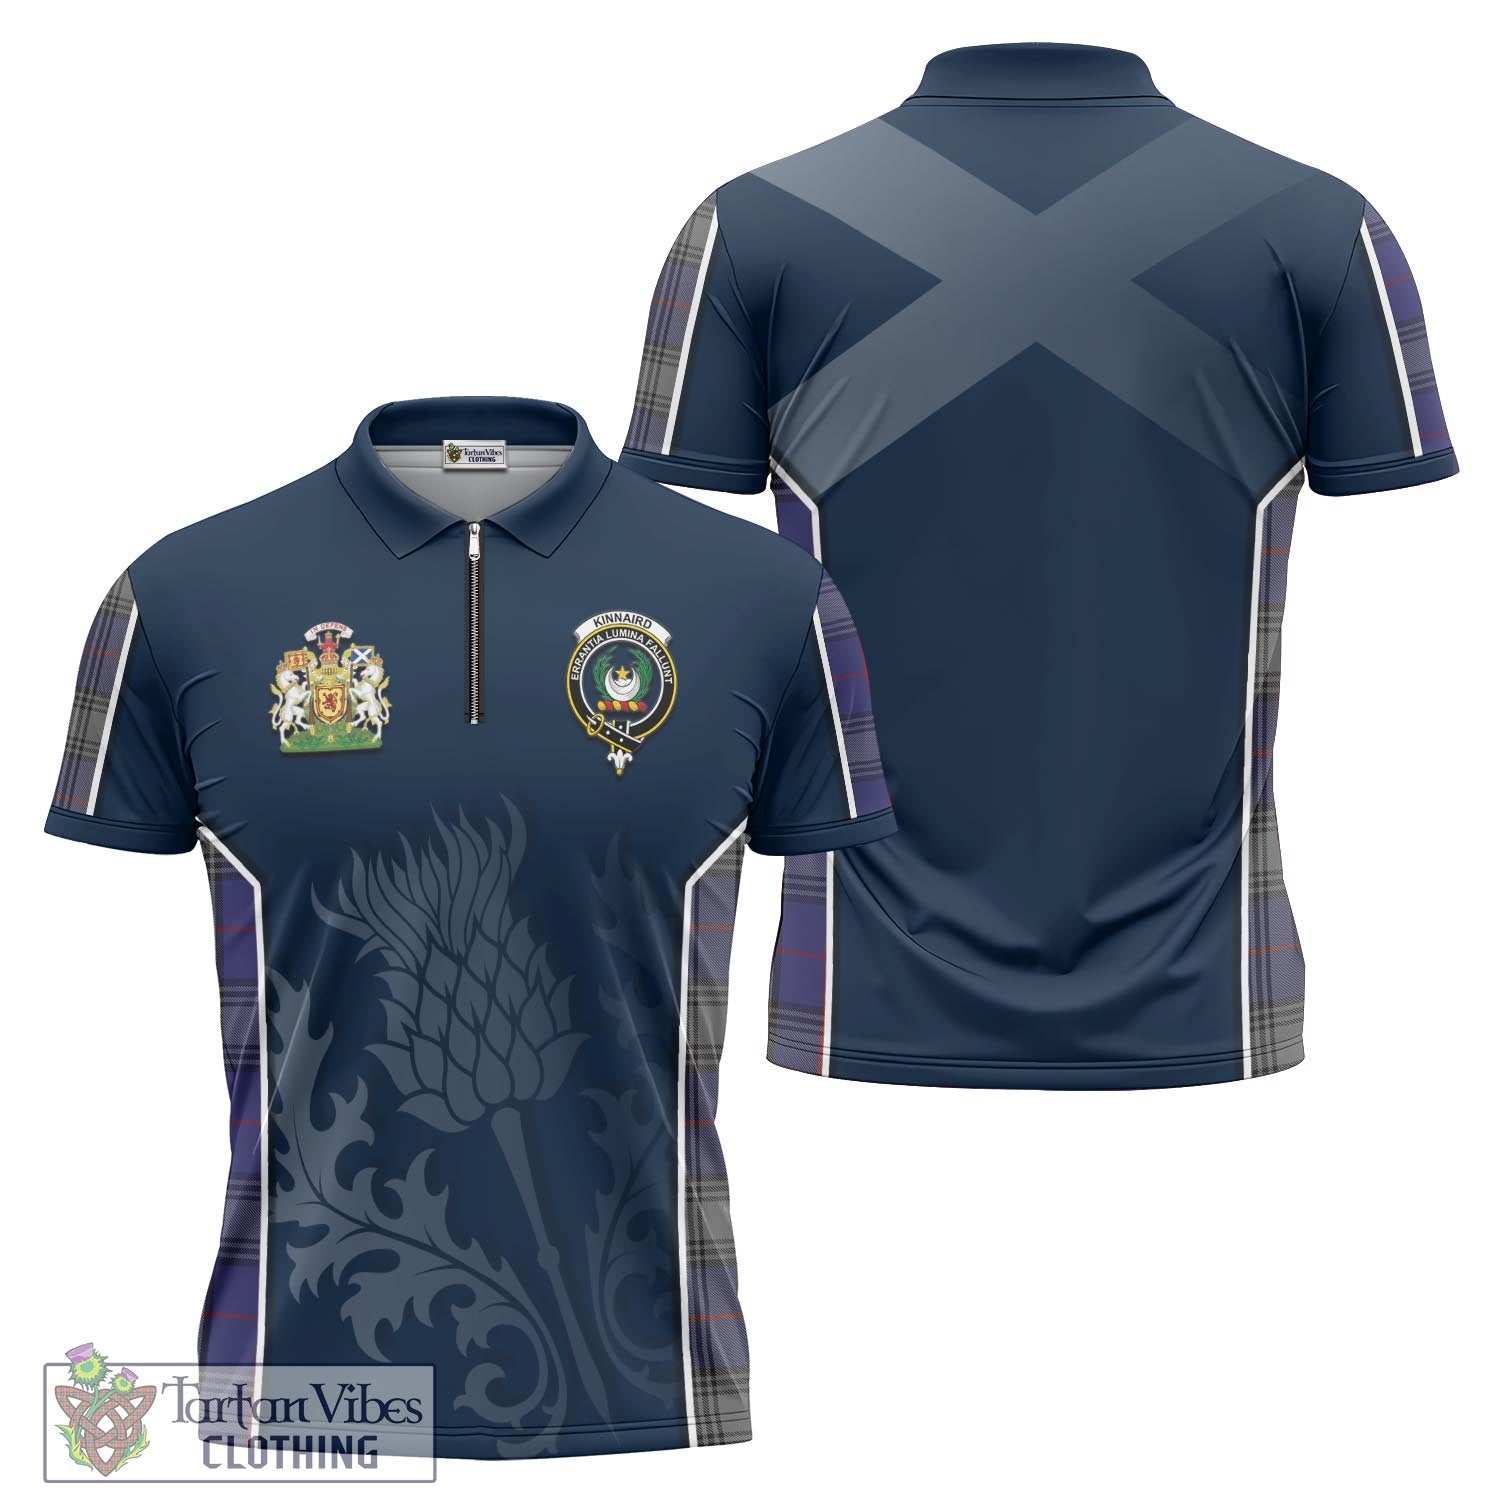 Tartan Vibes Clothing Kinnaird Tartan Zipper Polo Shirt with Family Crest and Scottish Thistle Vibes Sport Style